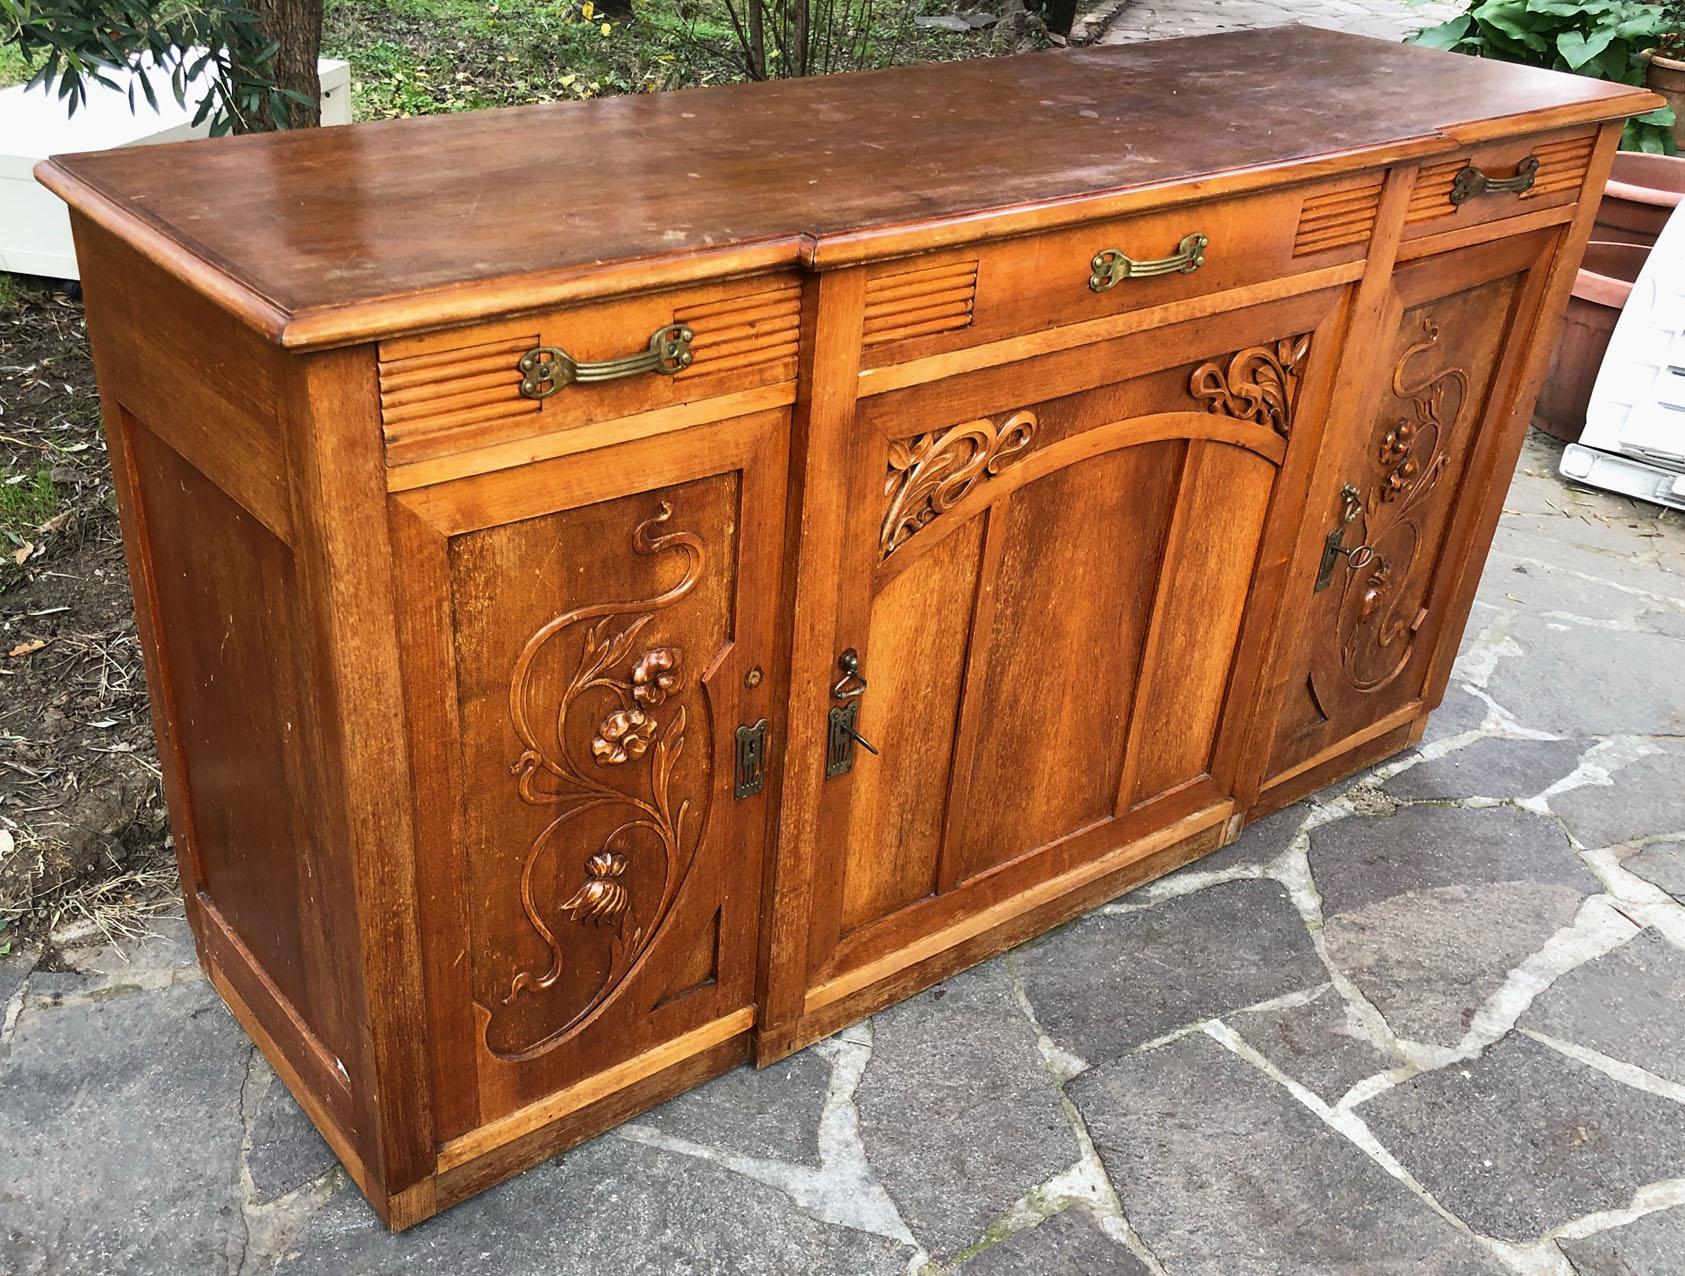 Art Nouveau Original Italian Art Noveau Sideboard in Honey-Colored Walnut with Three Drawers For Sale